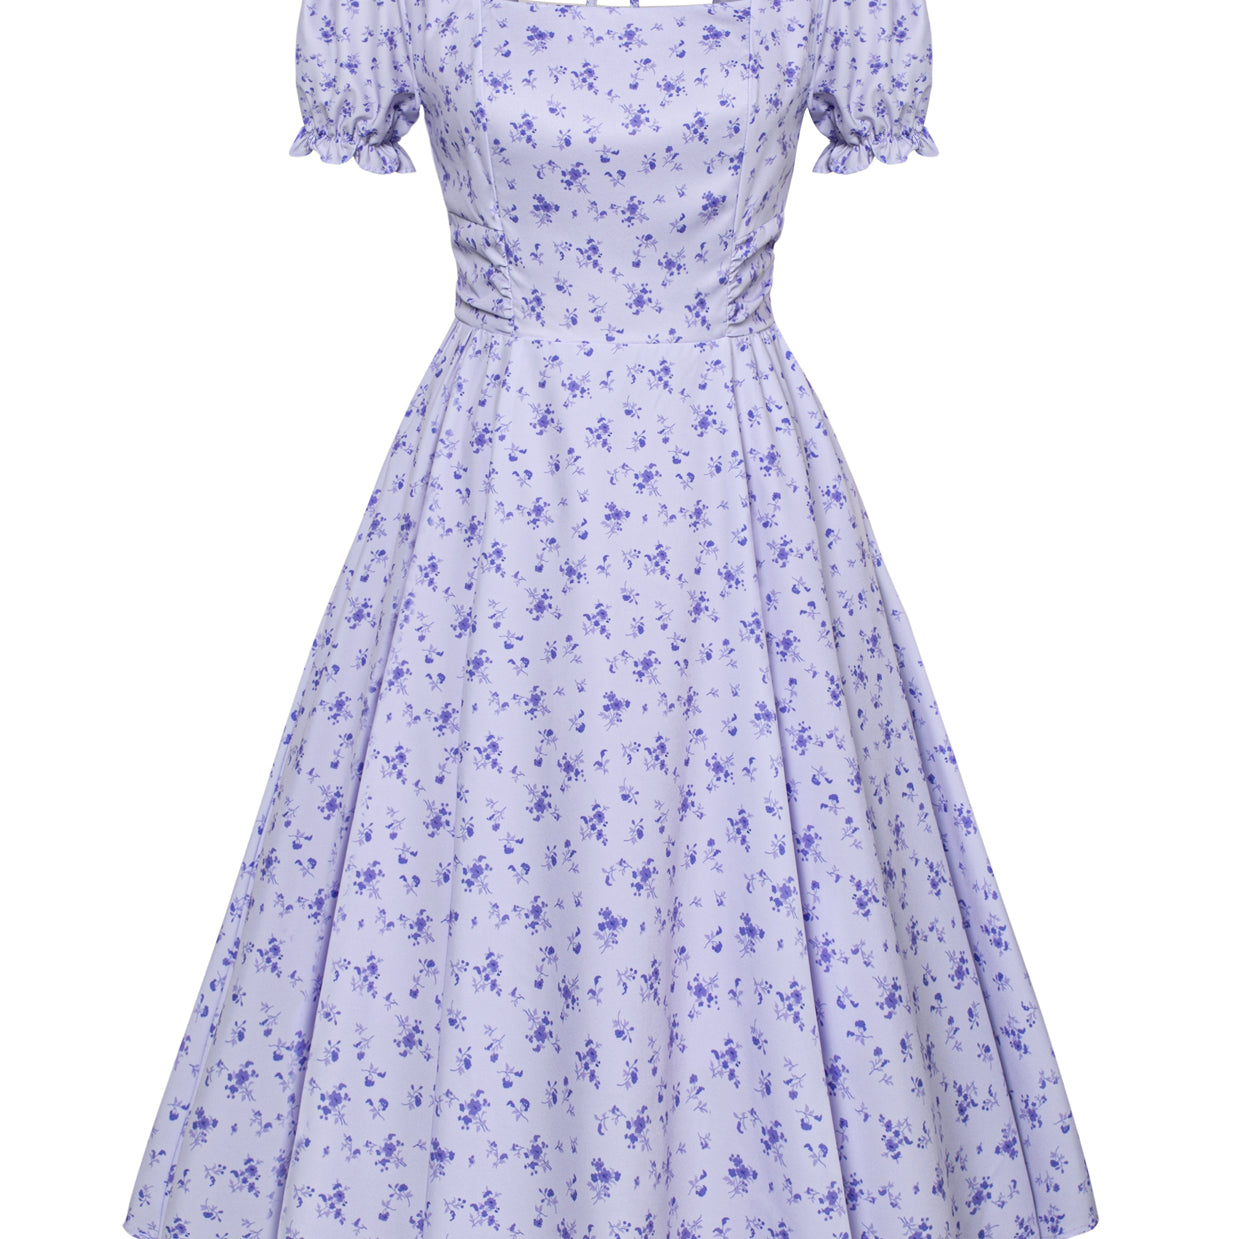 Vintage Cherry Print Cottagecore Cocktail Dresses Square Neck Puff Sleeve Dress with Pockets